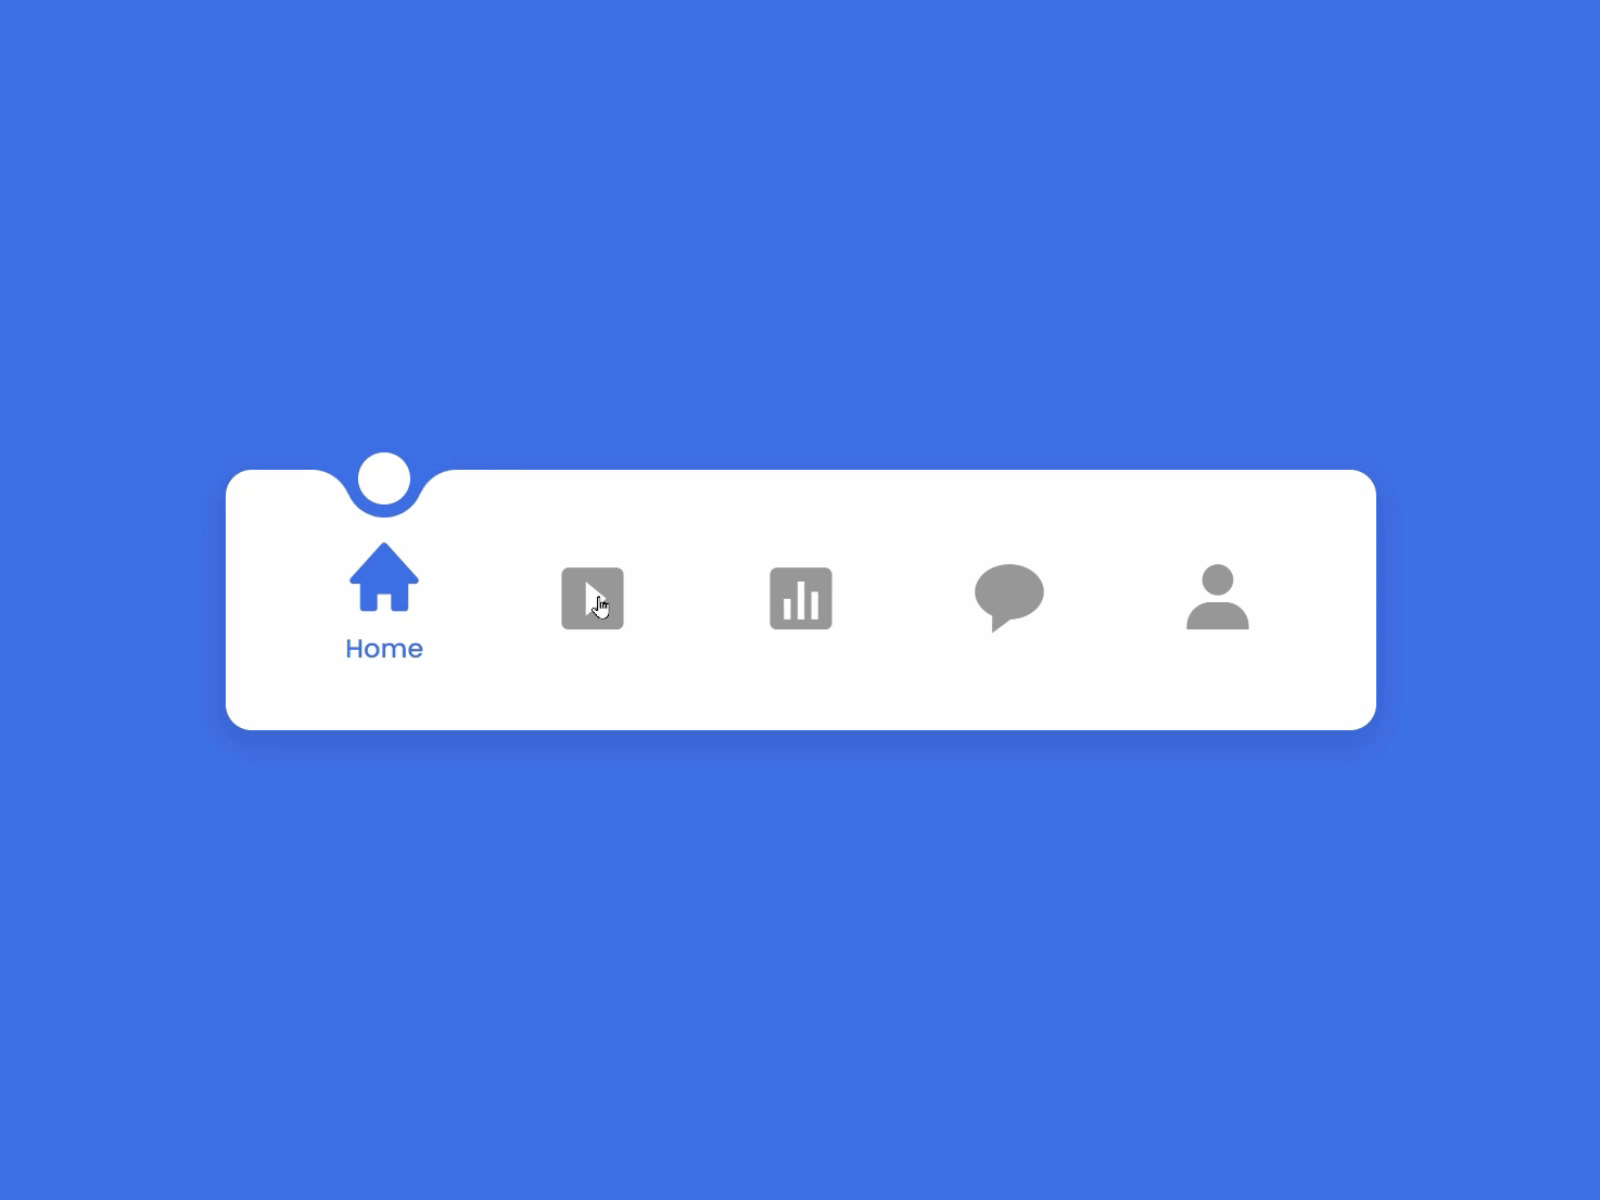 Download Progress Button  Motion design animation, Animated